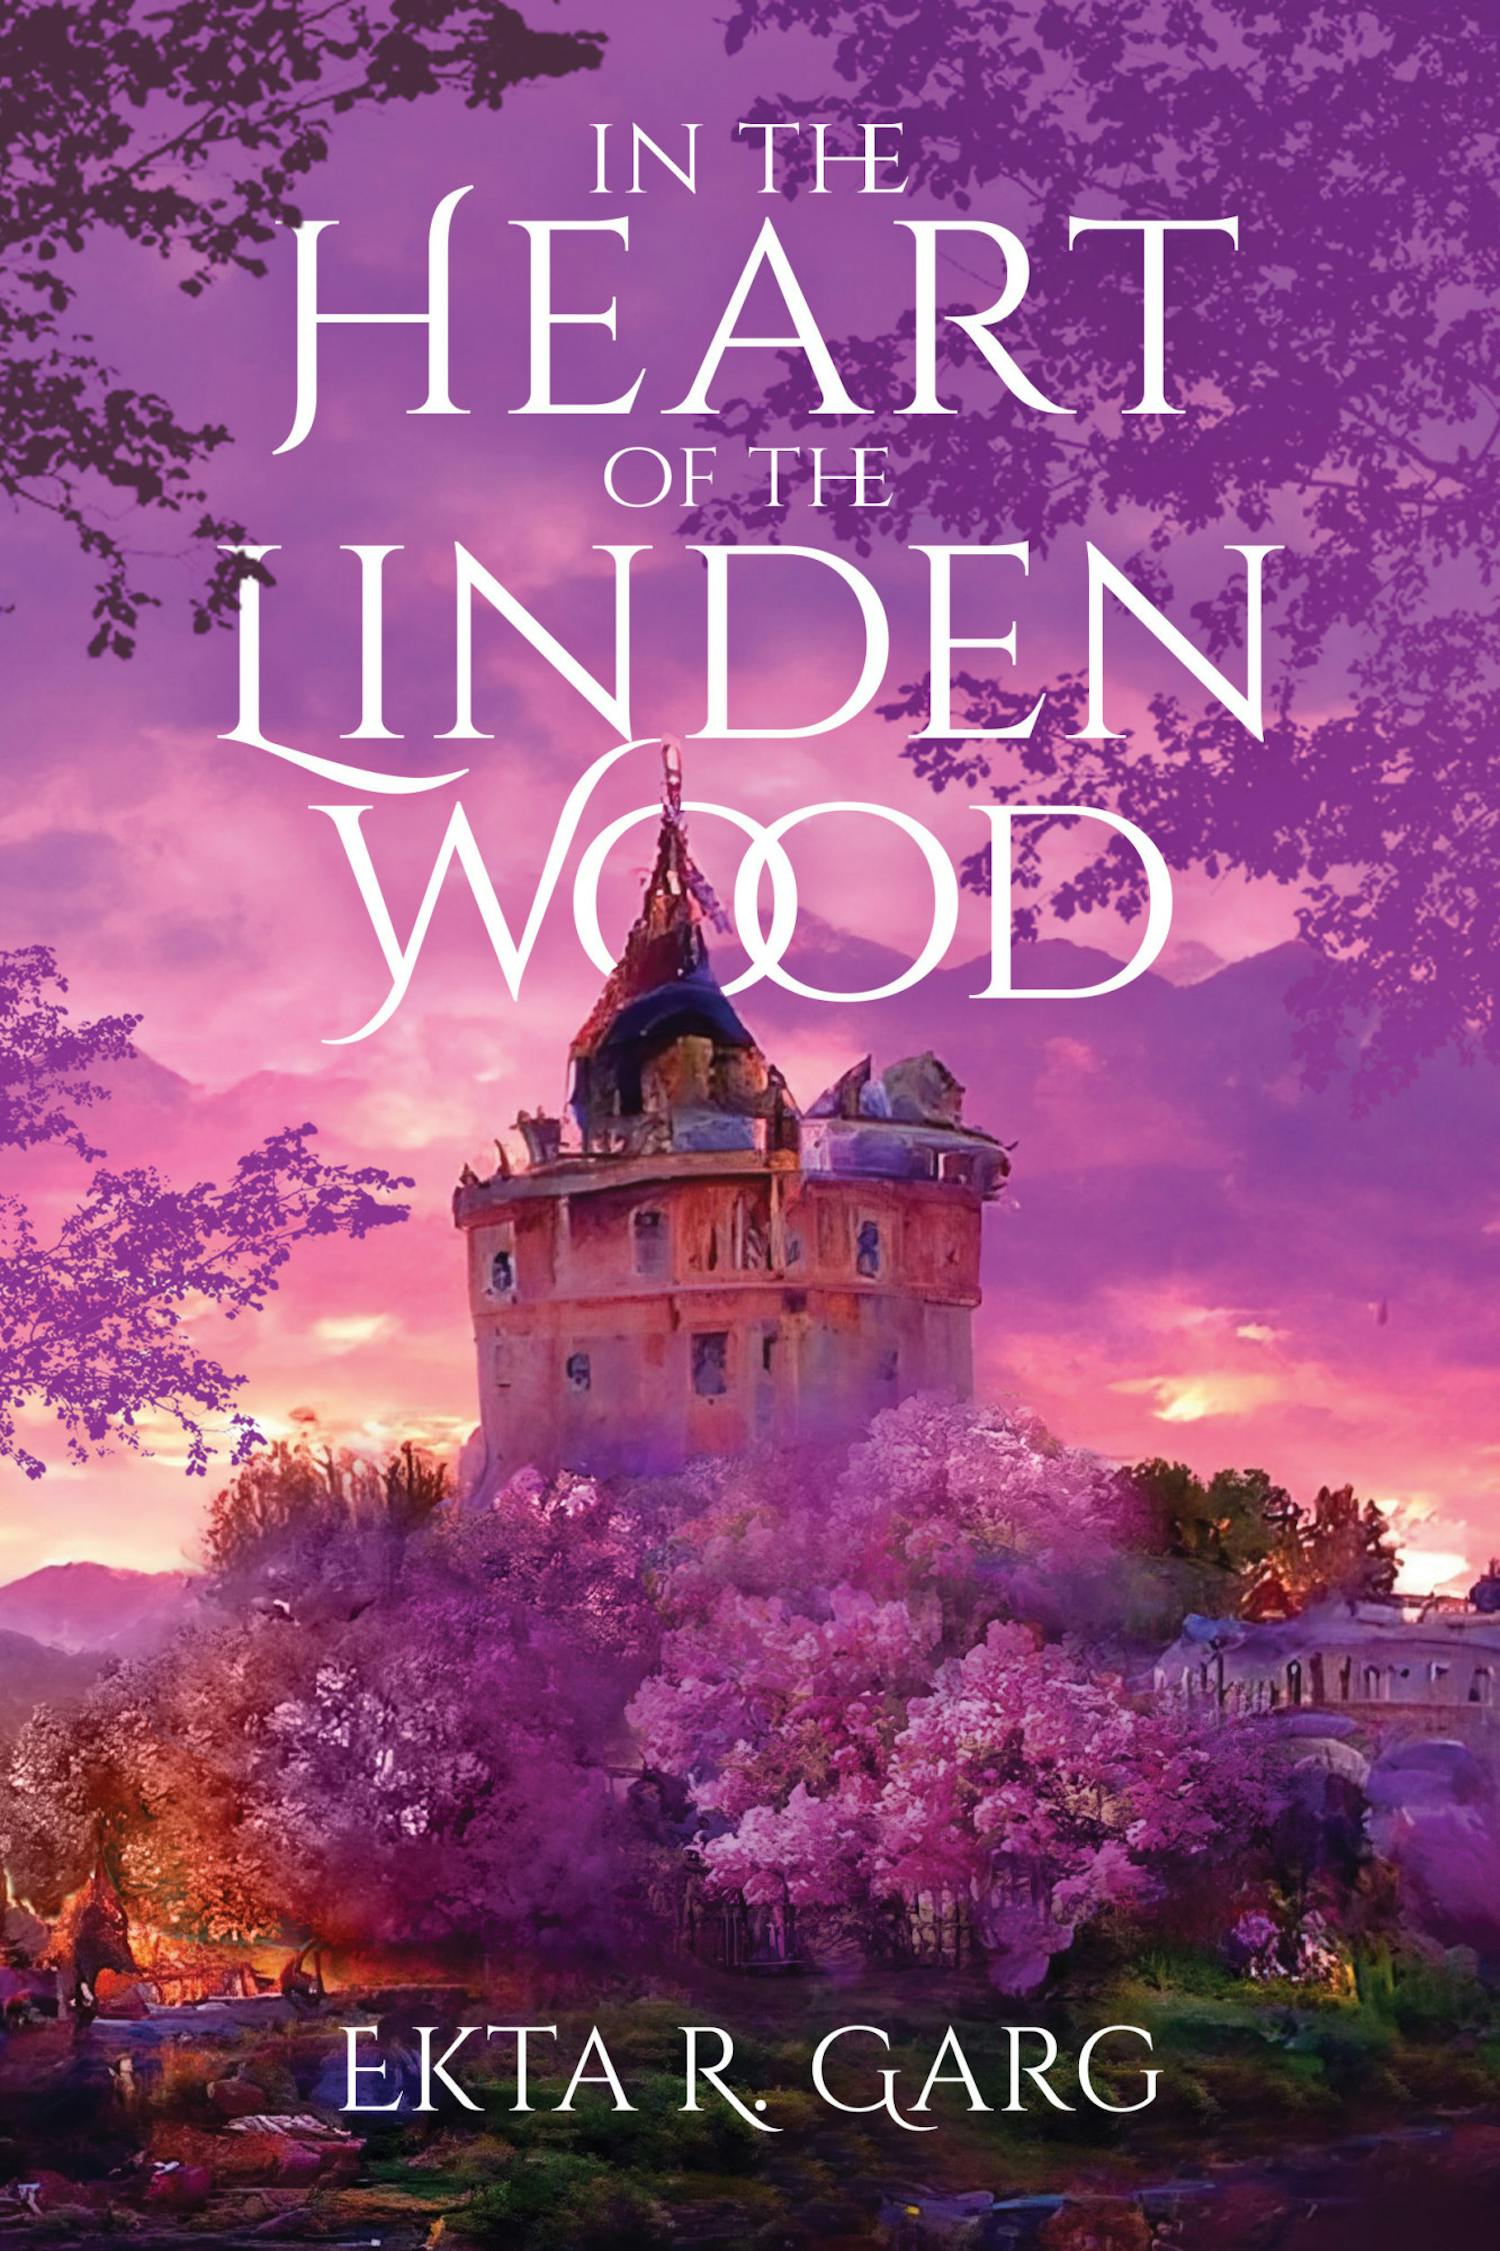 The cover of the Ekta Garg's newest novel, "In the Heart of the Linden Wood." The book is a fantasy story that follows a king trying to provide for his kingdom while trying to heal from deep-rooted trauma and a broken heart.&nbsp;